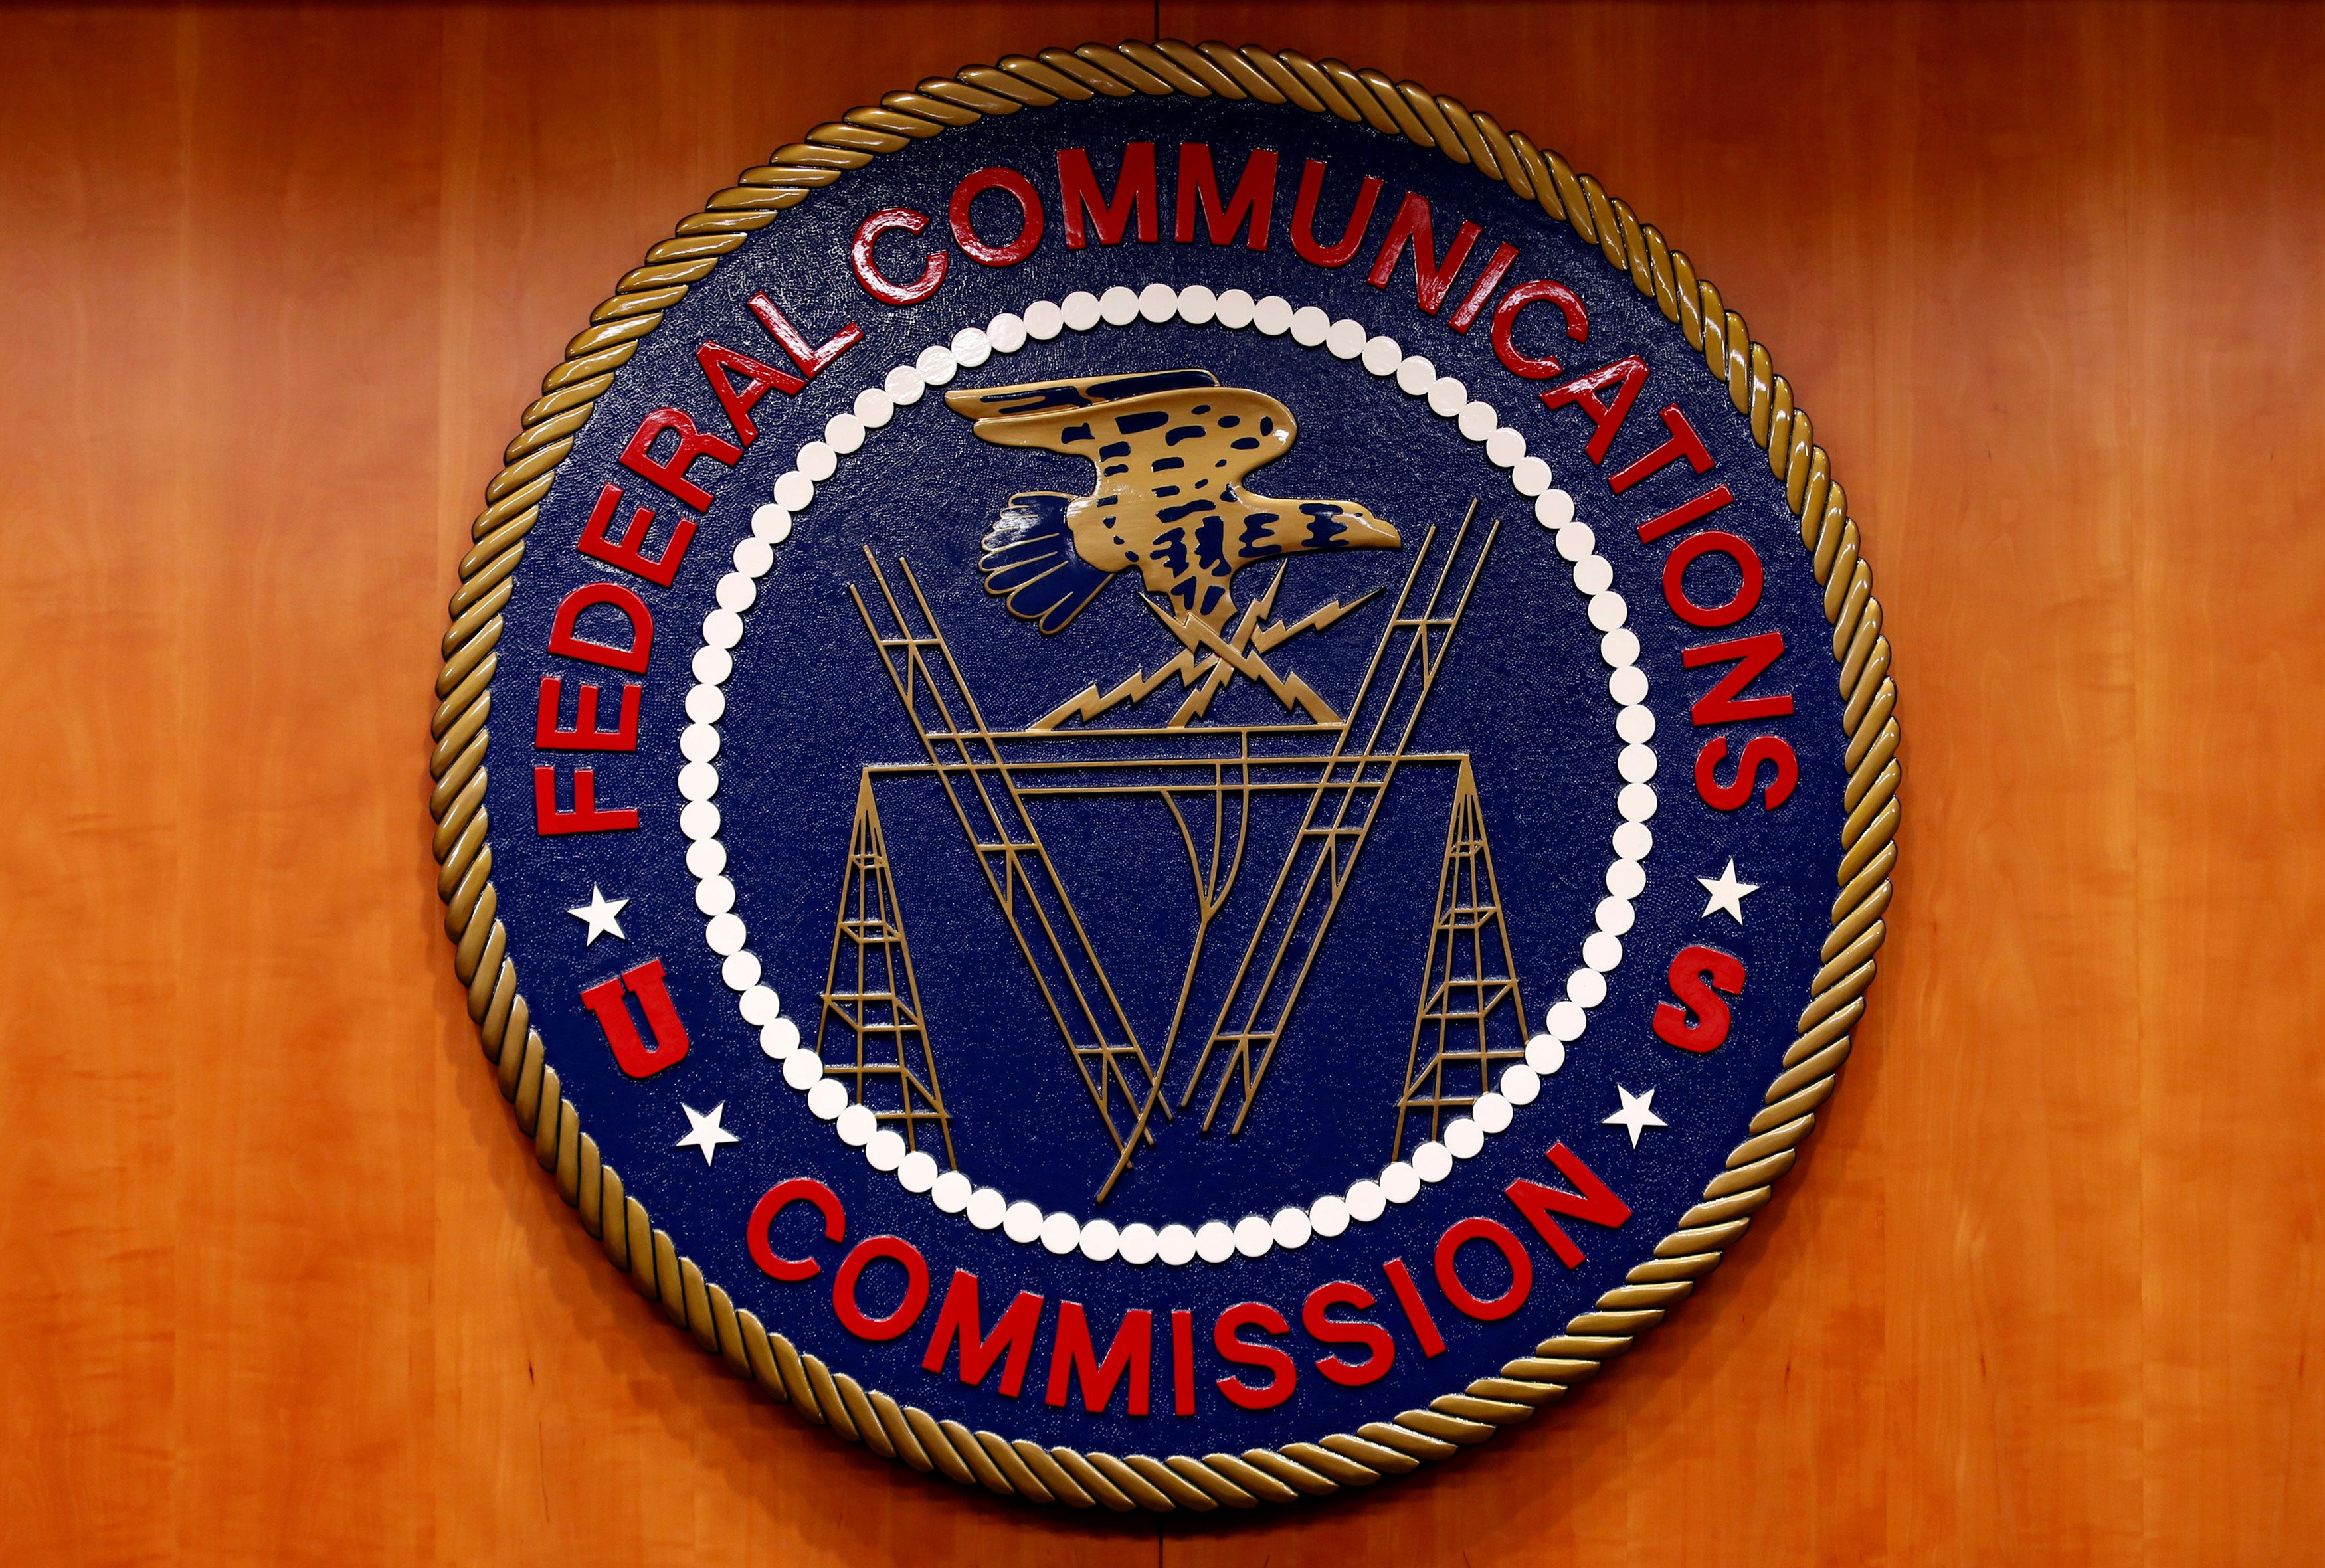 The Federal Communications Commission (FCC) logo is seen before the FCC Net Neutrality hearing in Washington February 26, 2015. REUTERS/Yuri Gripas/File Photo